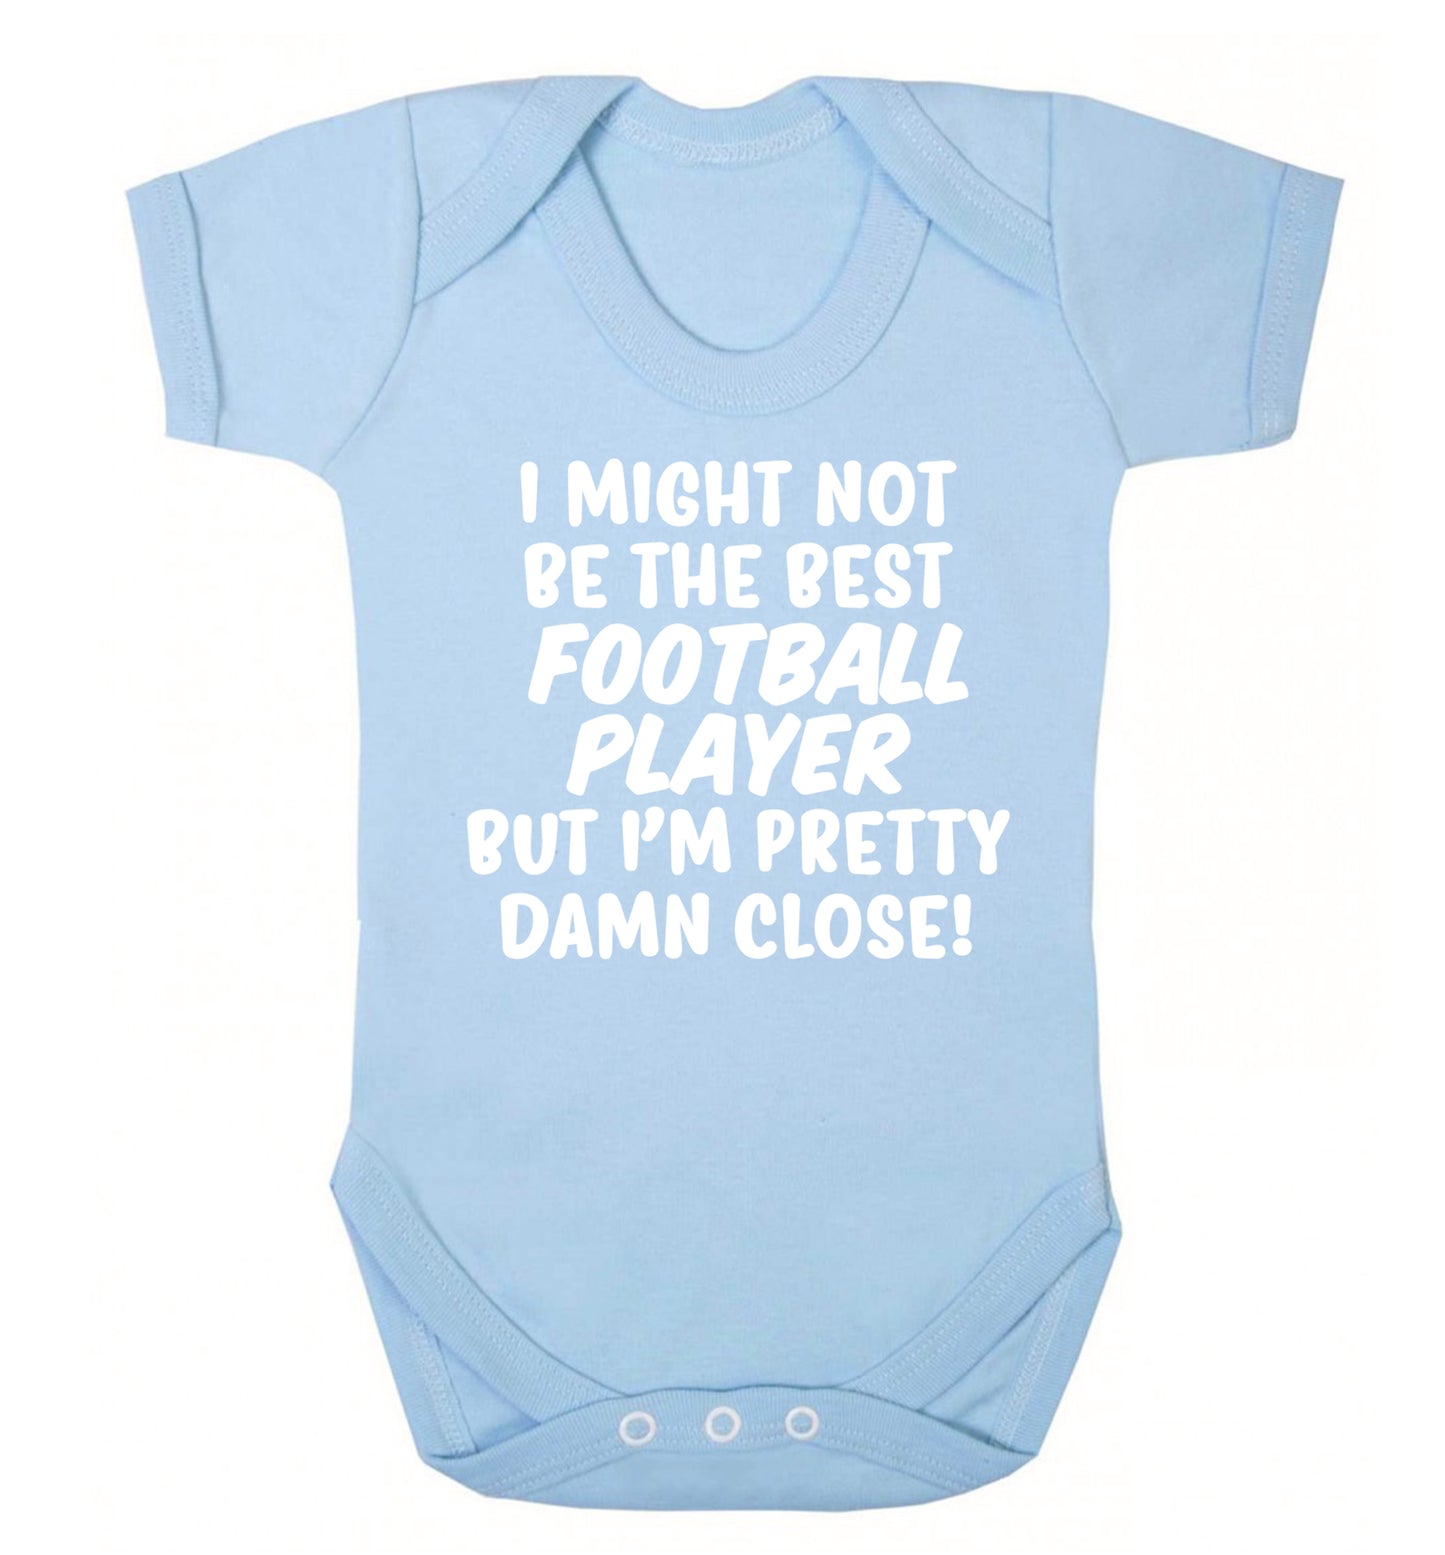 I might not be the best football player but I'm pretty close! Baby Vest pale blue 18-24 months